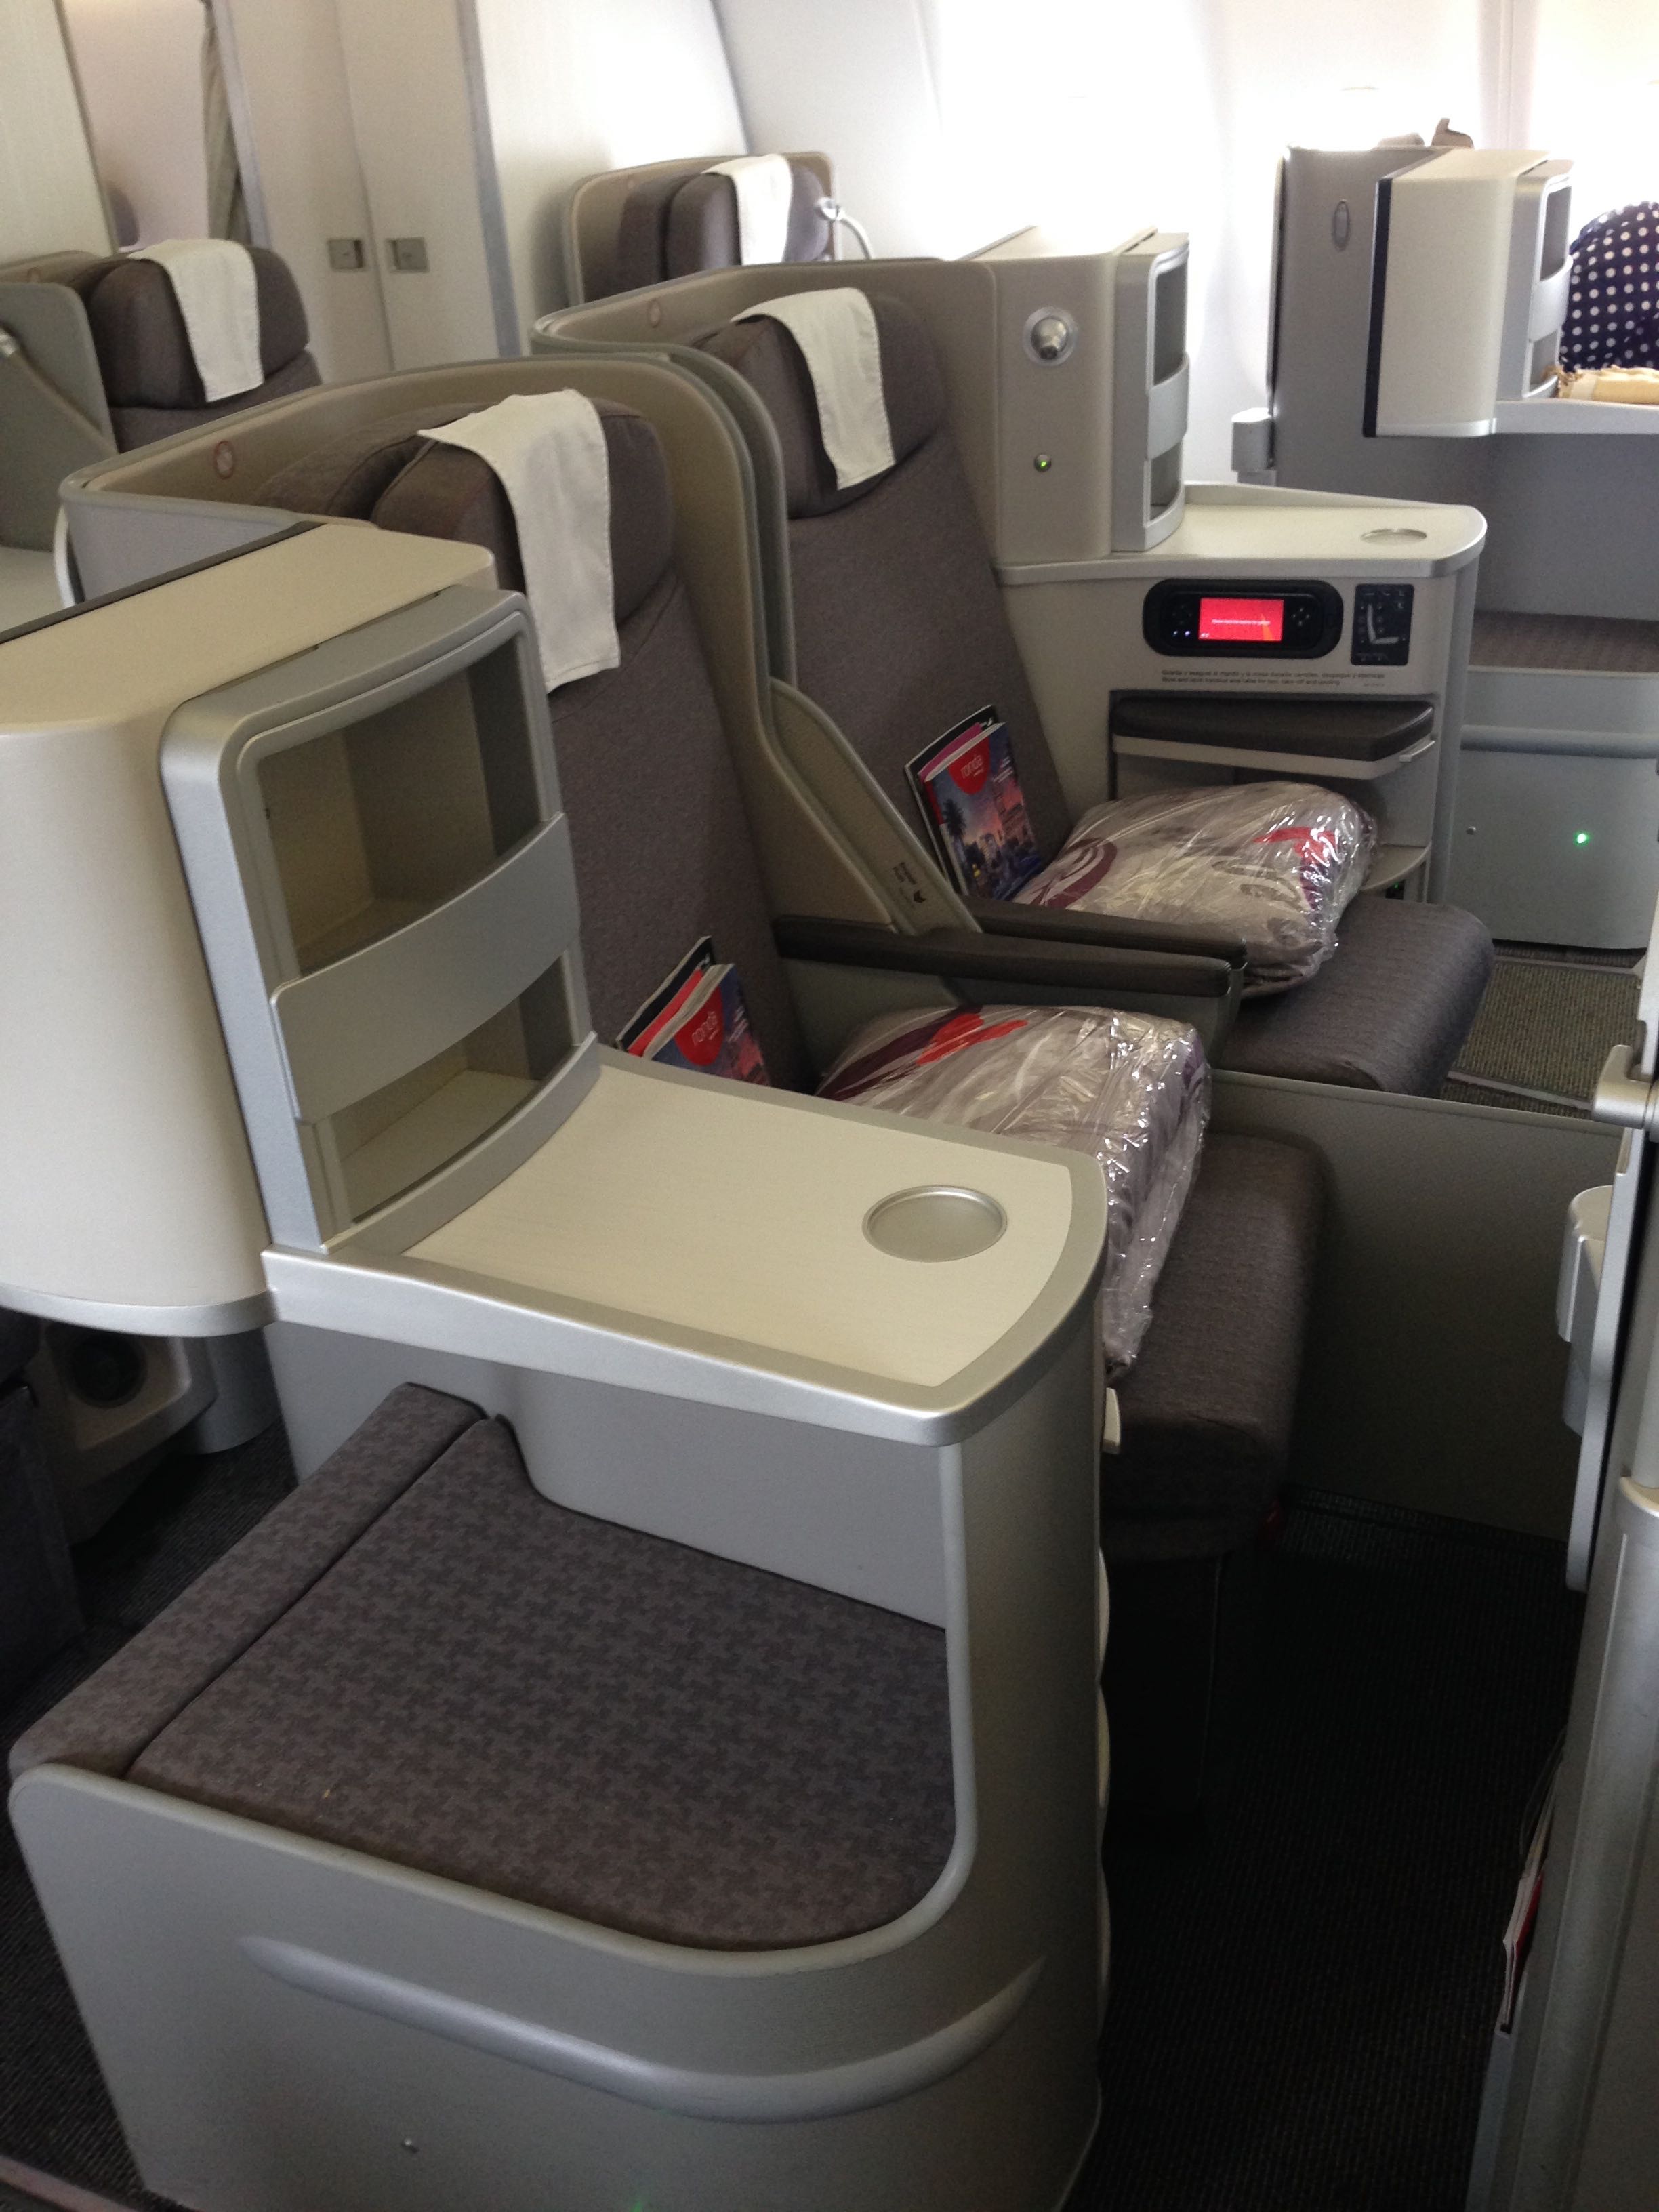 Trip Report and Flight Review - Iberia's New Business Class on the A330-300